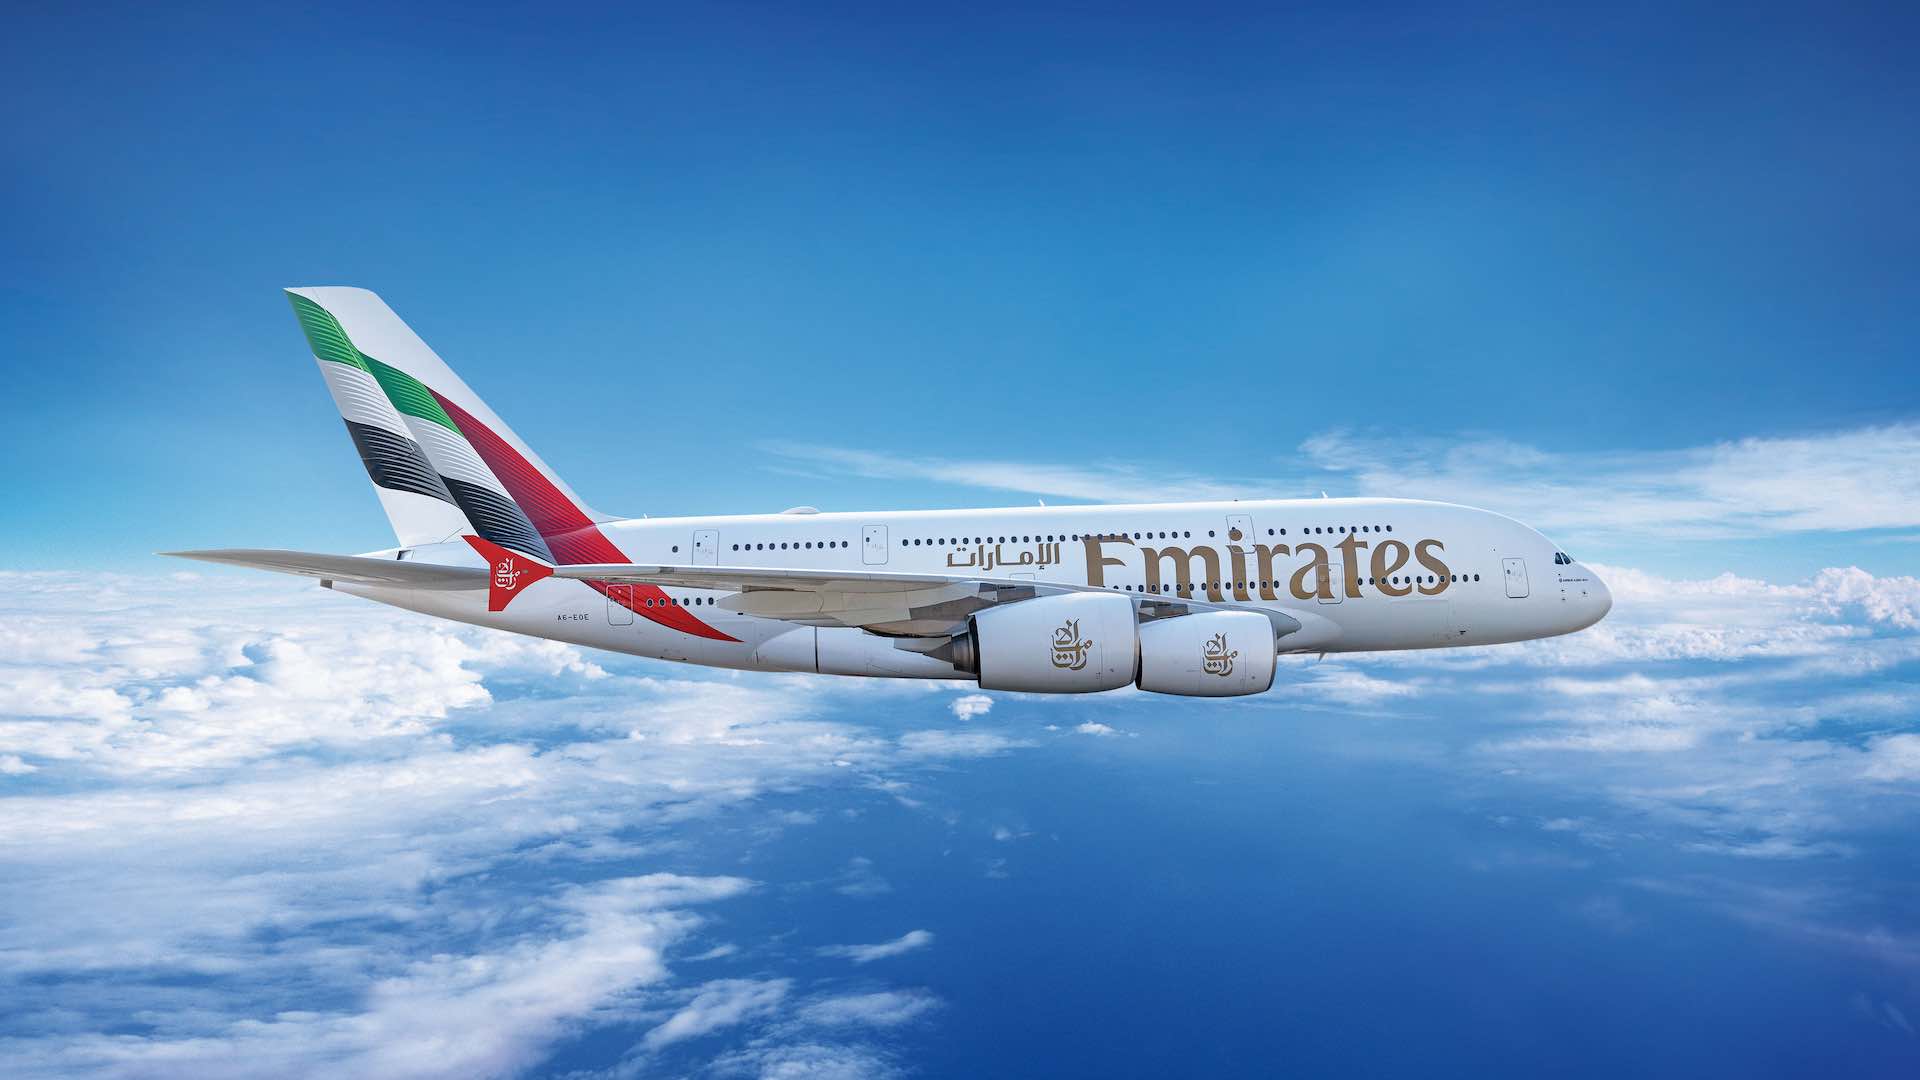 Emirates boosts capacity by 40 percent on popular Dubai-Toronto route